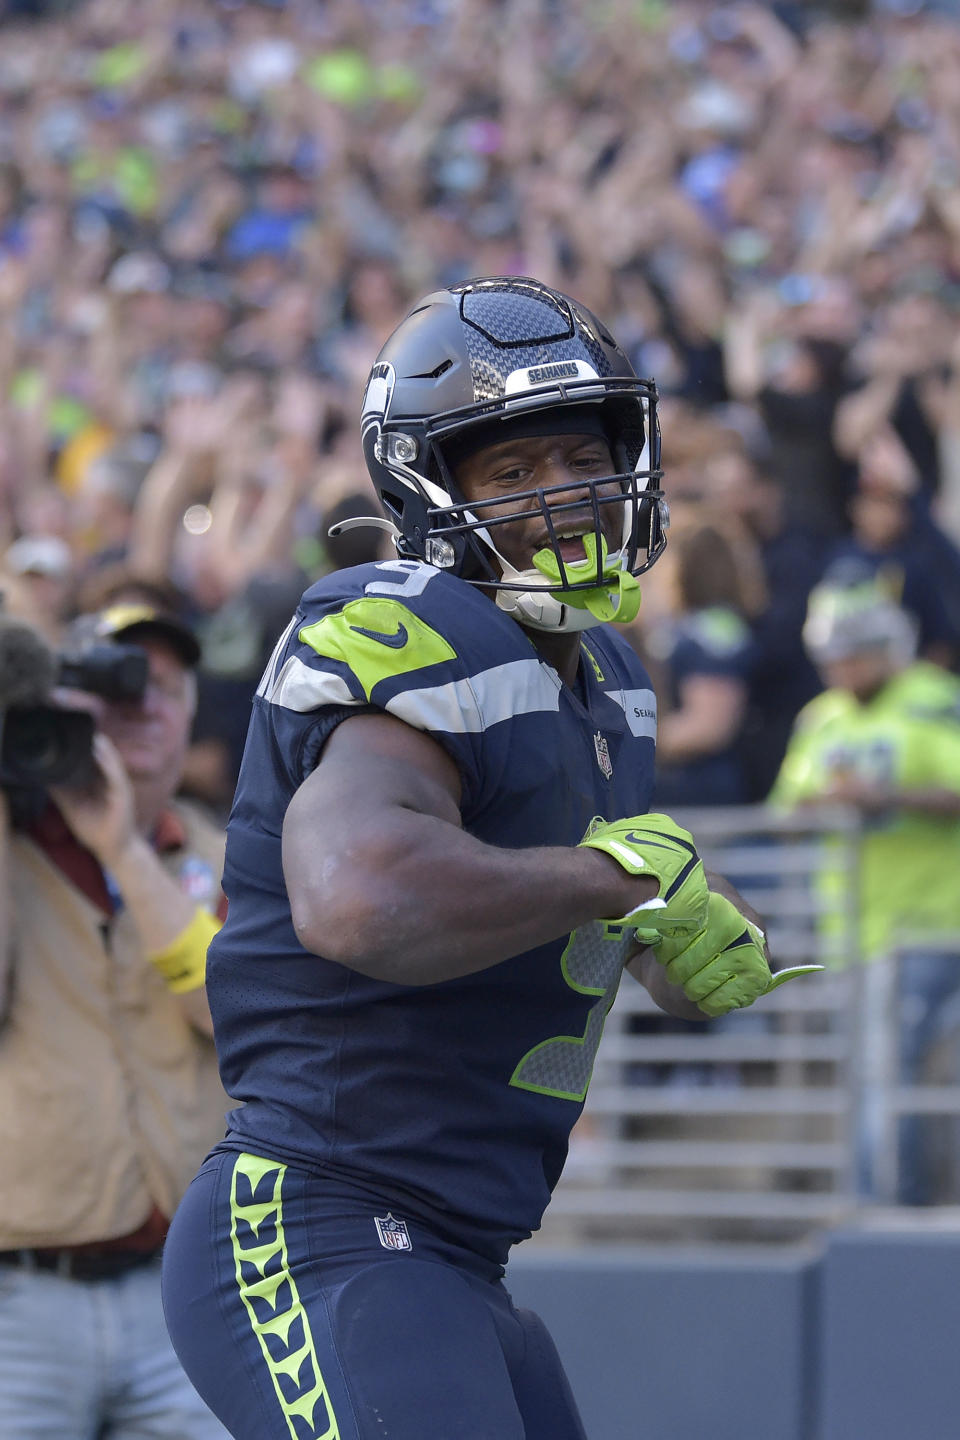 Seattle Seahawks running back Kenneth Walker III celebrates after scoring a touchdown against the Arizona Cardinals during the second half of an NFL football game in Seattle, Sunday, Oct. 16, 2022. (AP Photo/Caean Couto)